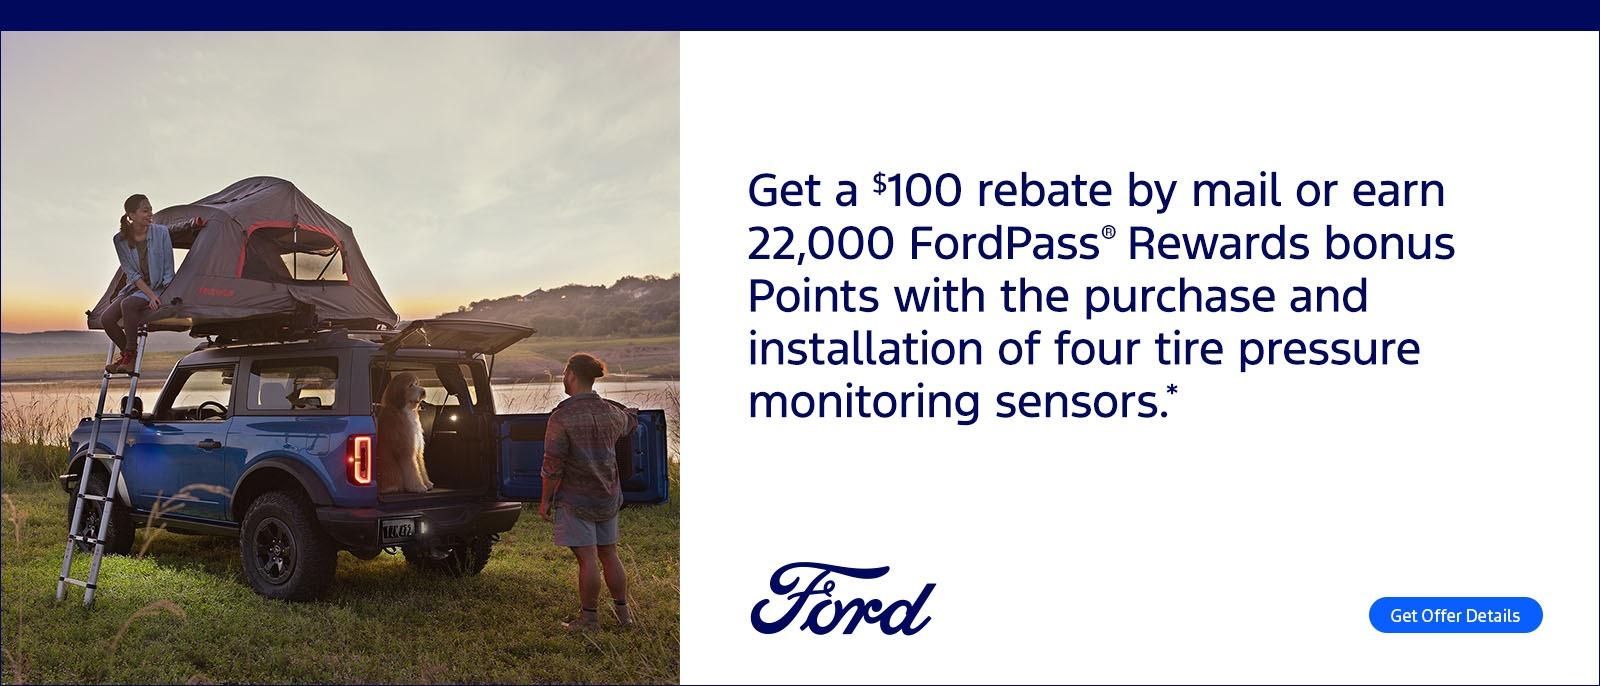 Get a $100 rebate by mail or earn 22,000 FordPass Rewards bonus Points with the purchase and installation of four tire pressure monitoring sensors.